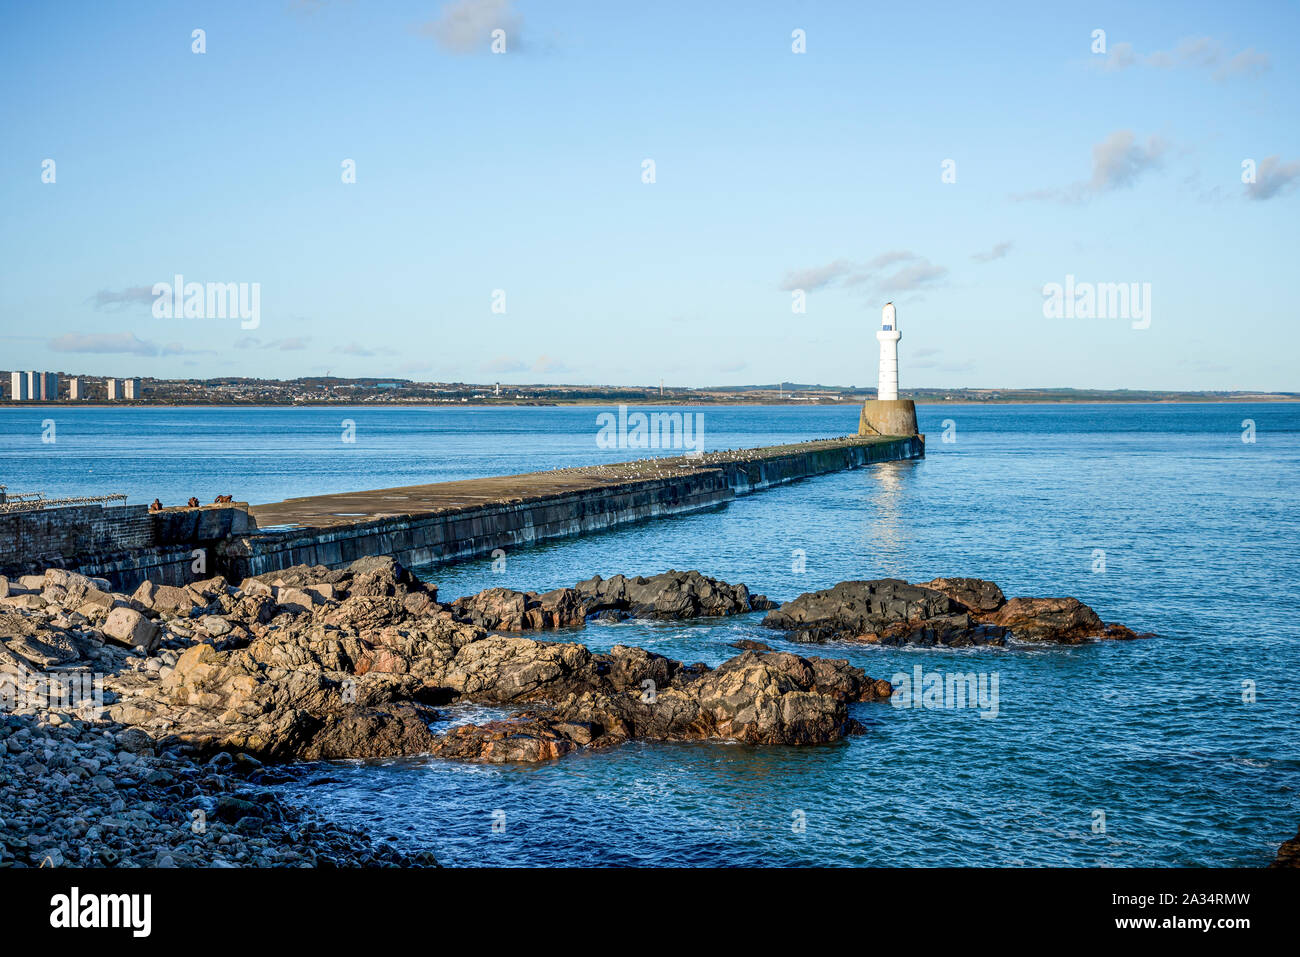 Rocky shore at South breakwater lighthouse near entrance to Aberdeen port and harbor, Scotland Stock Photo